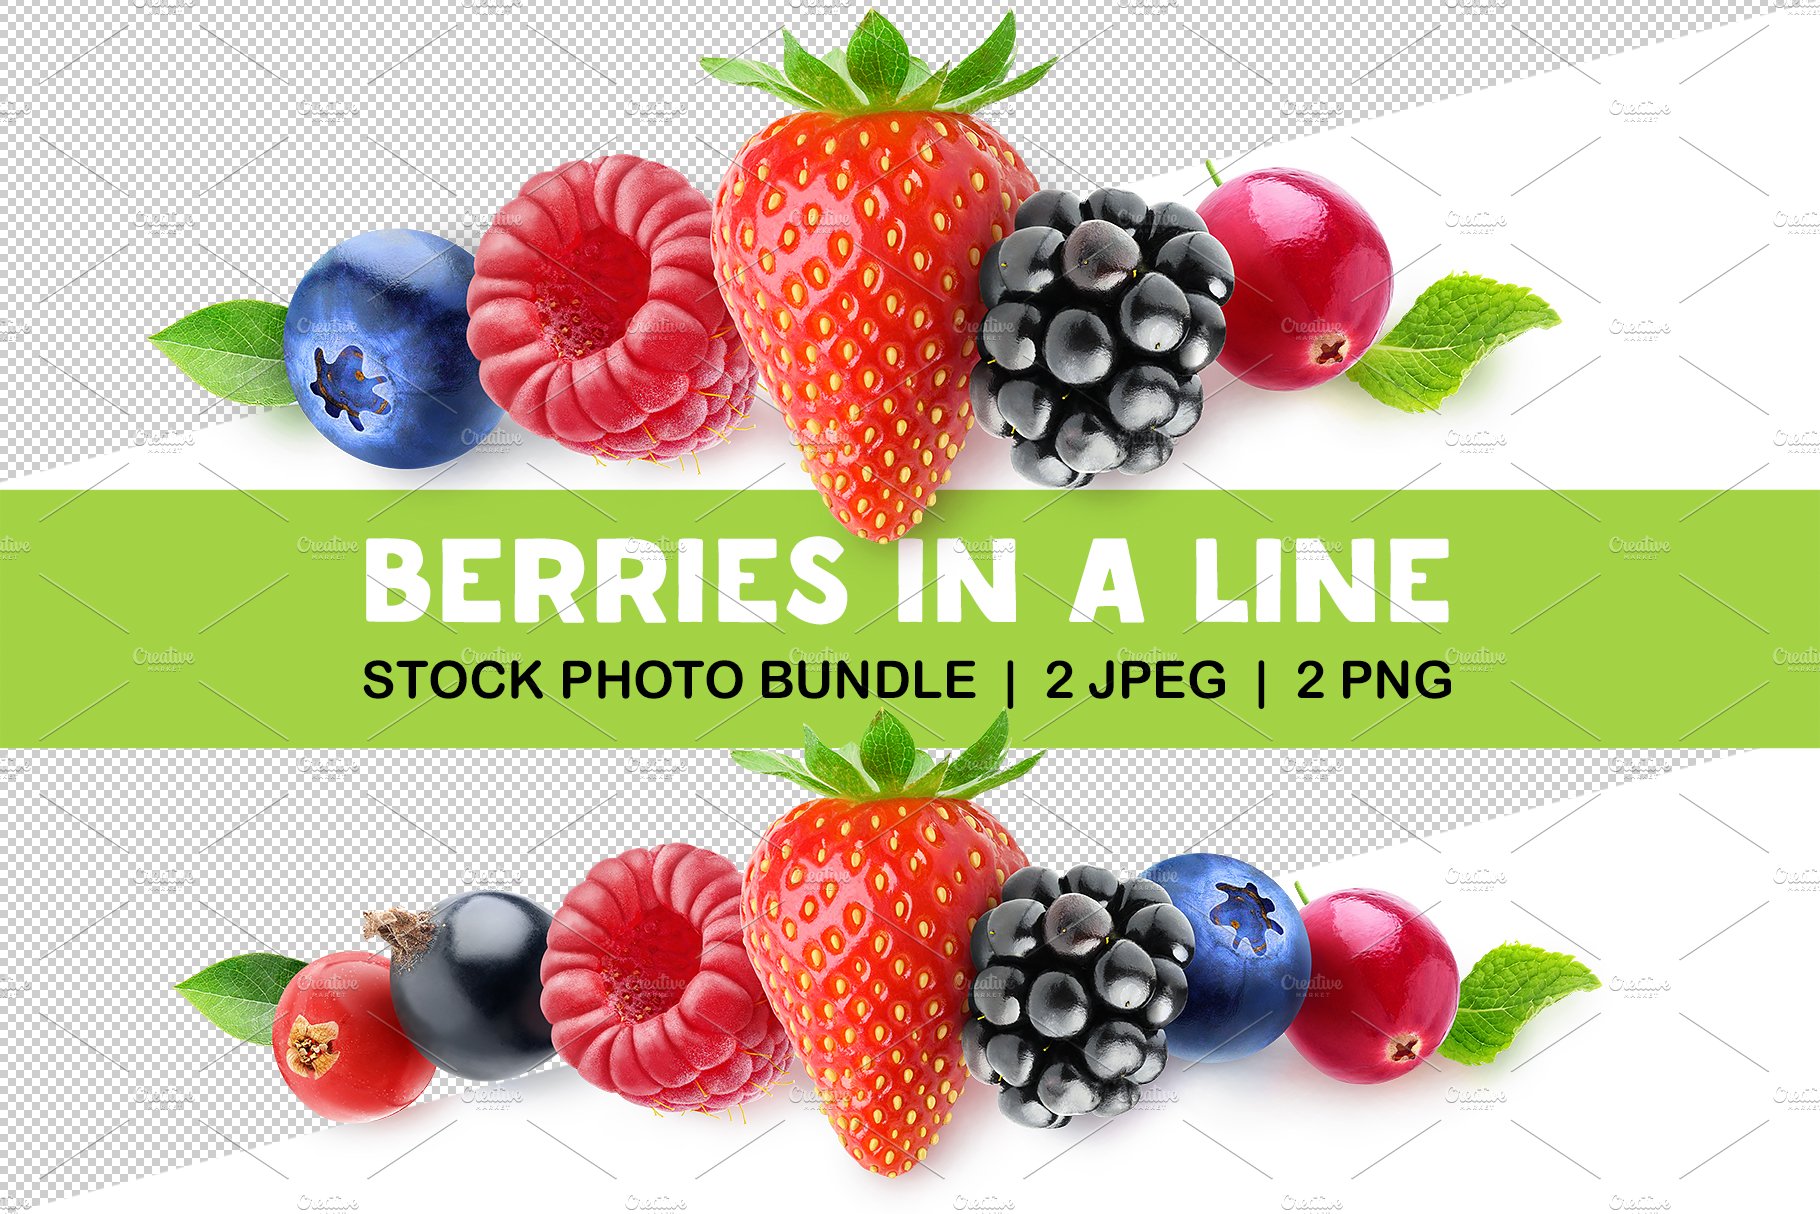 Fresh berries in a line cover image.